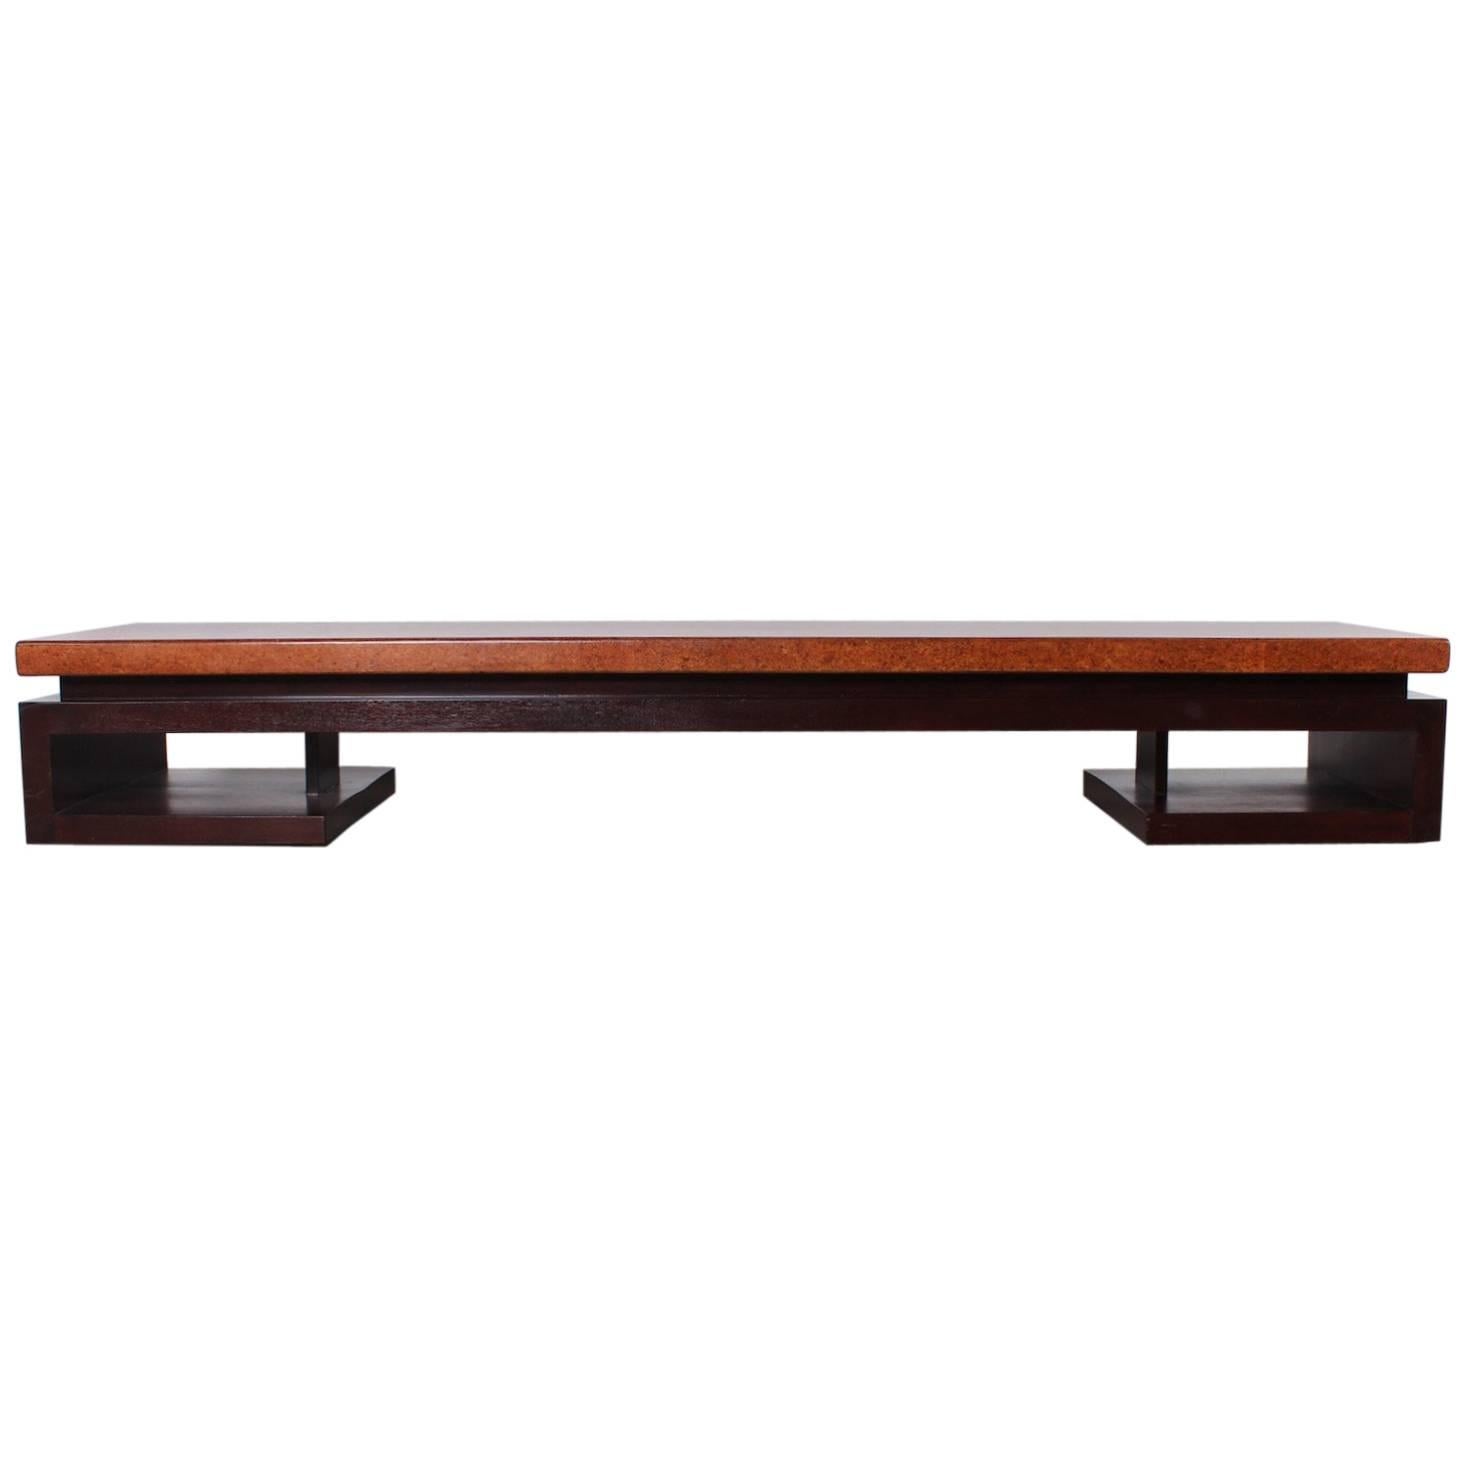 Cork Top Bench by Paul Frankl